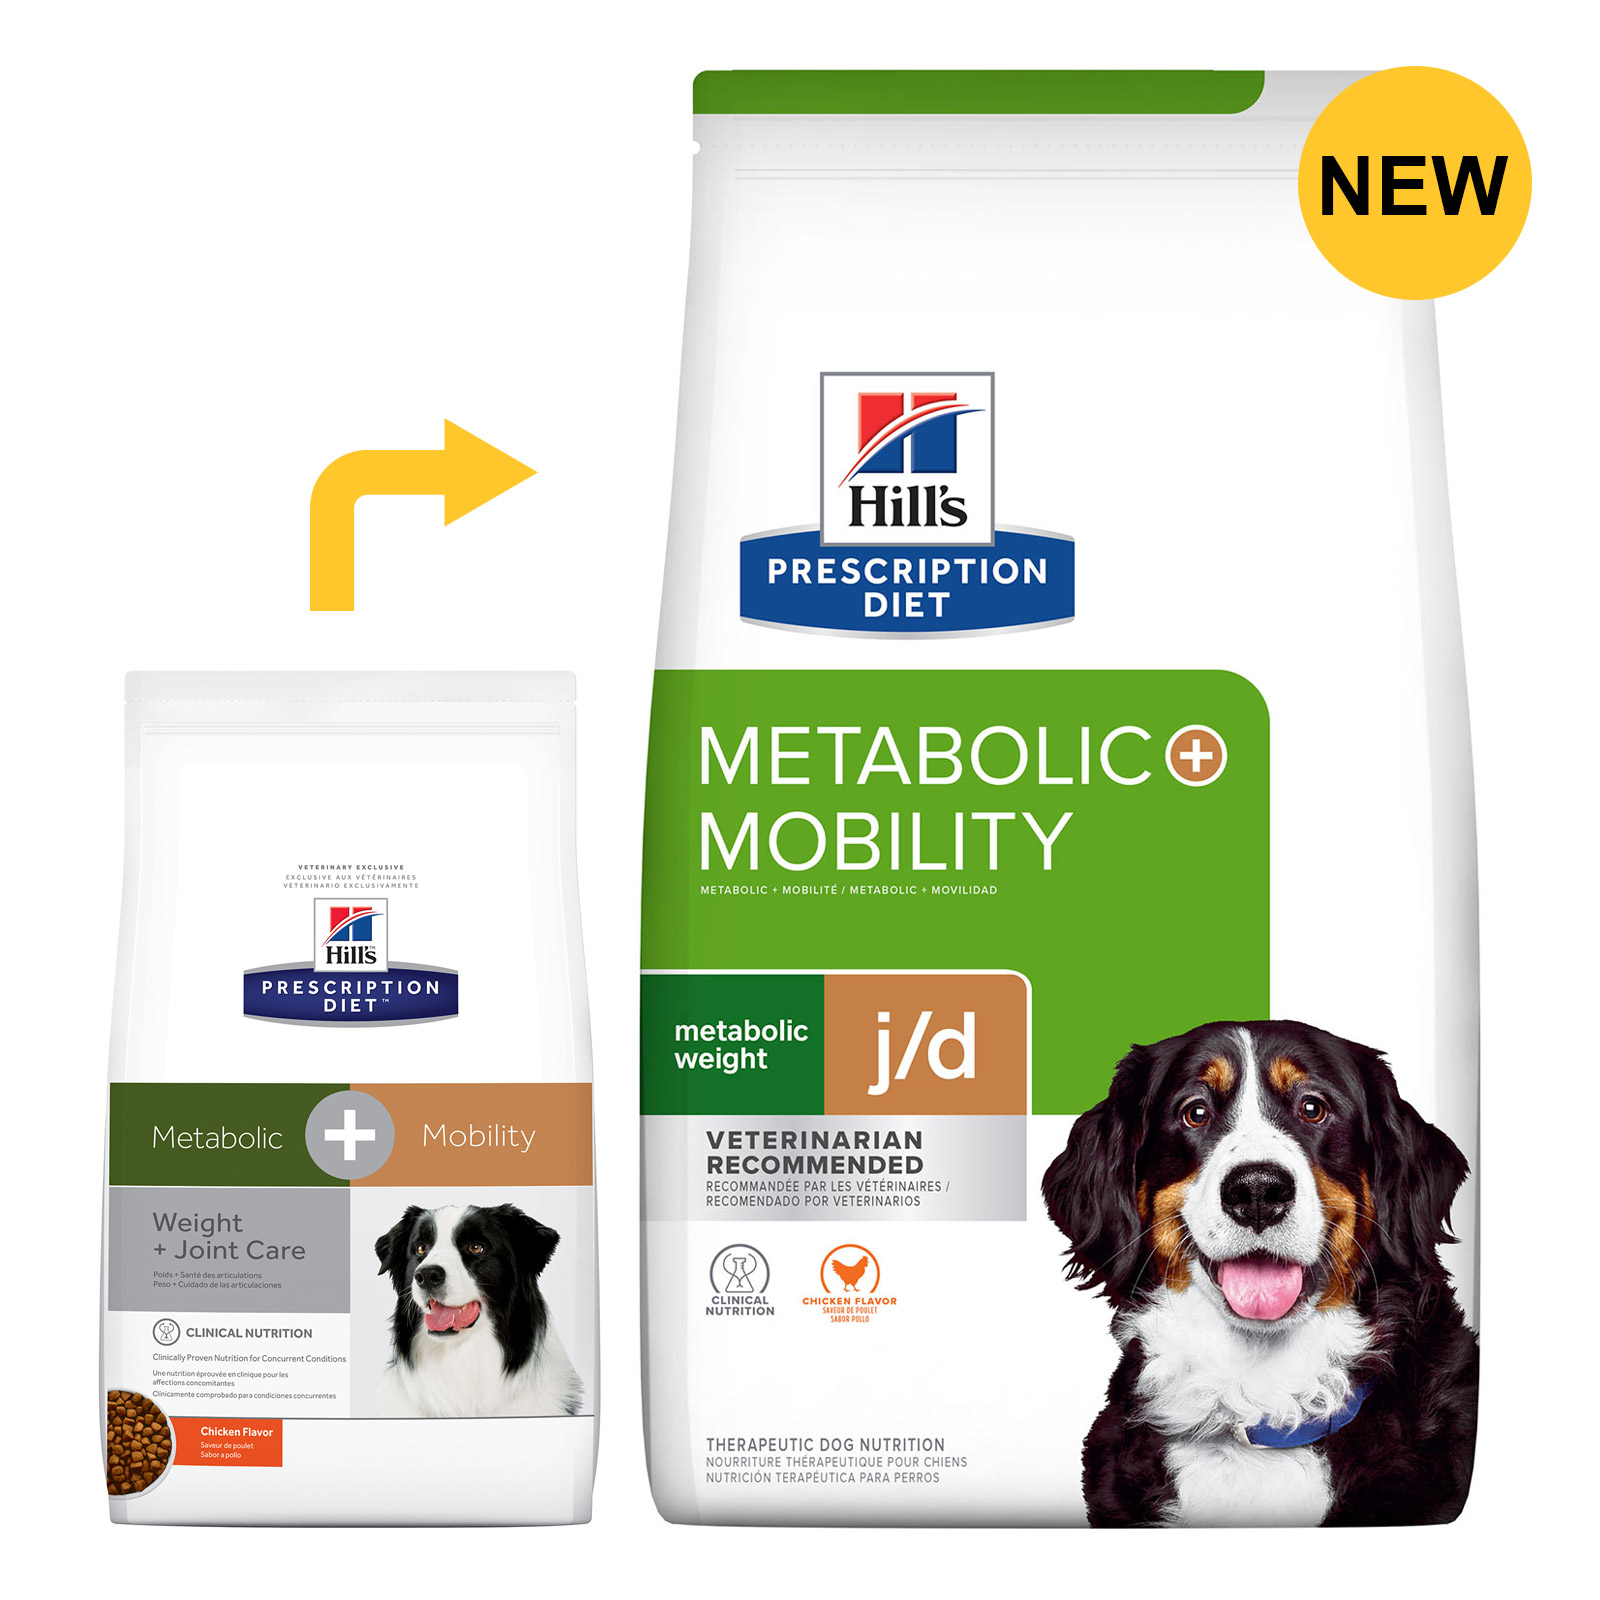 Hill’s Prescription Diet Metabolic + Mobility (Weight And Joint Care) Dry Dog Food for Food